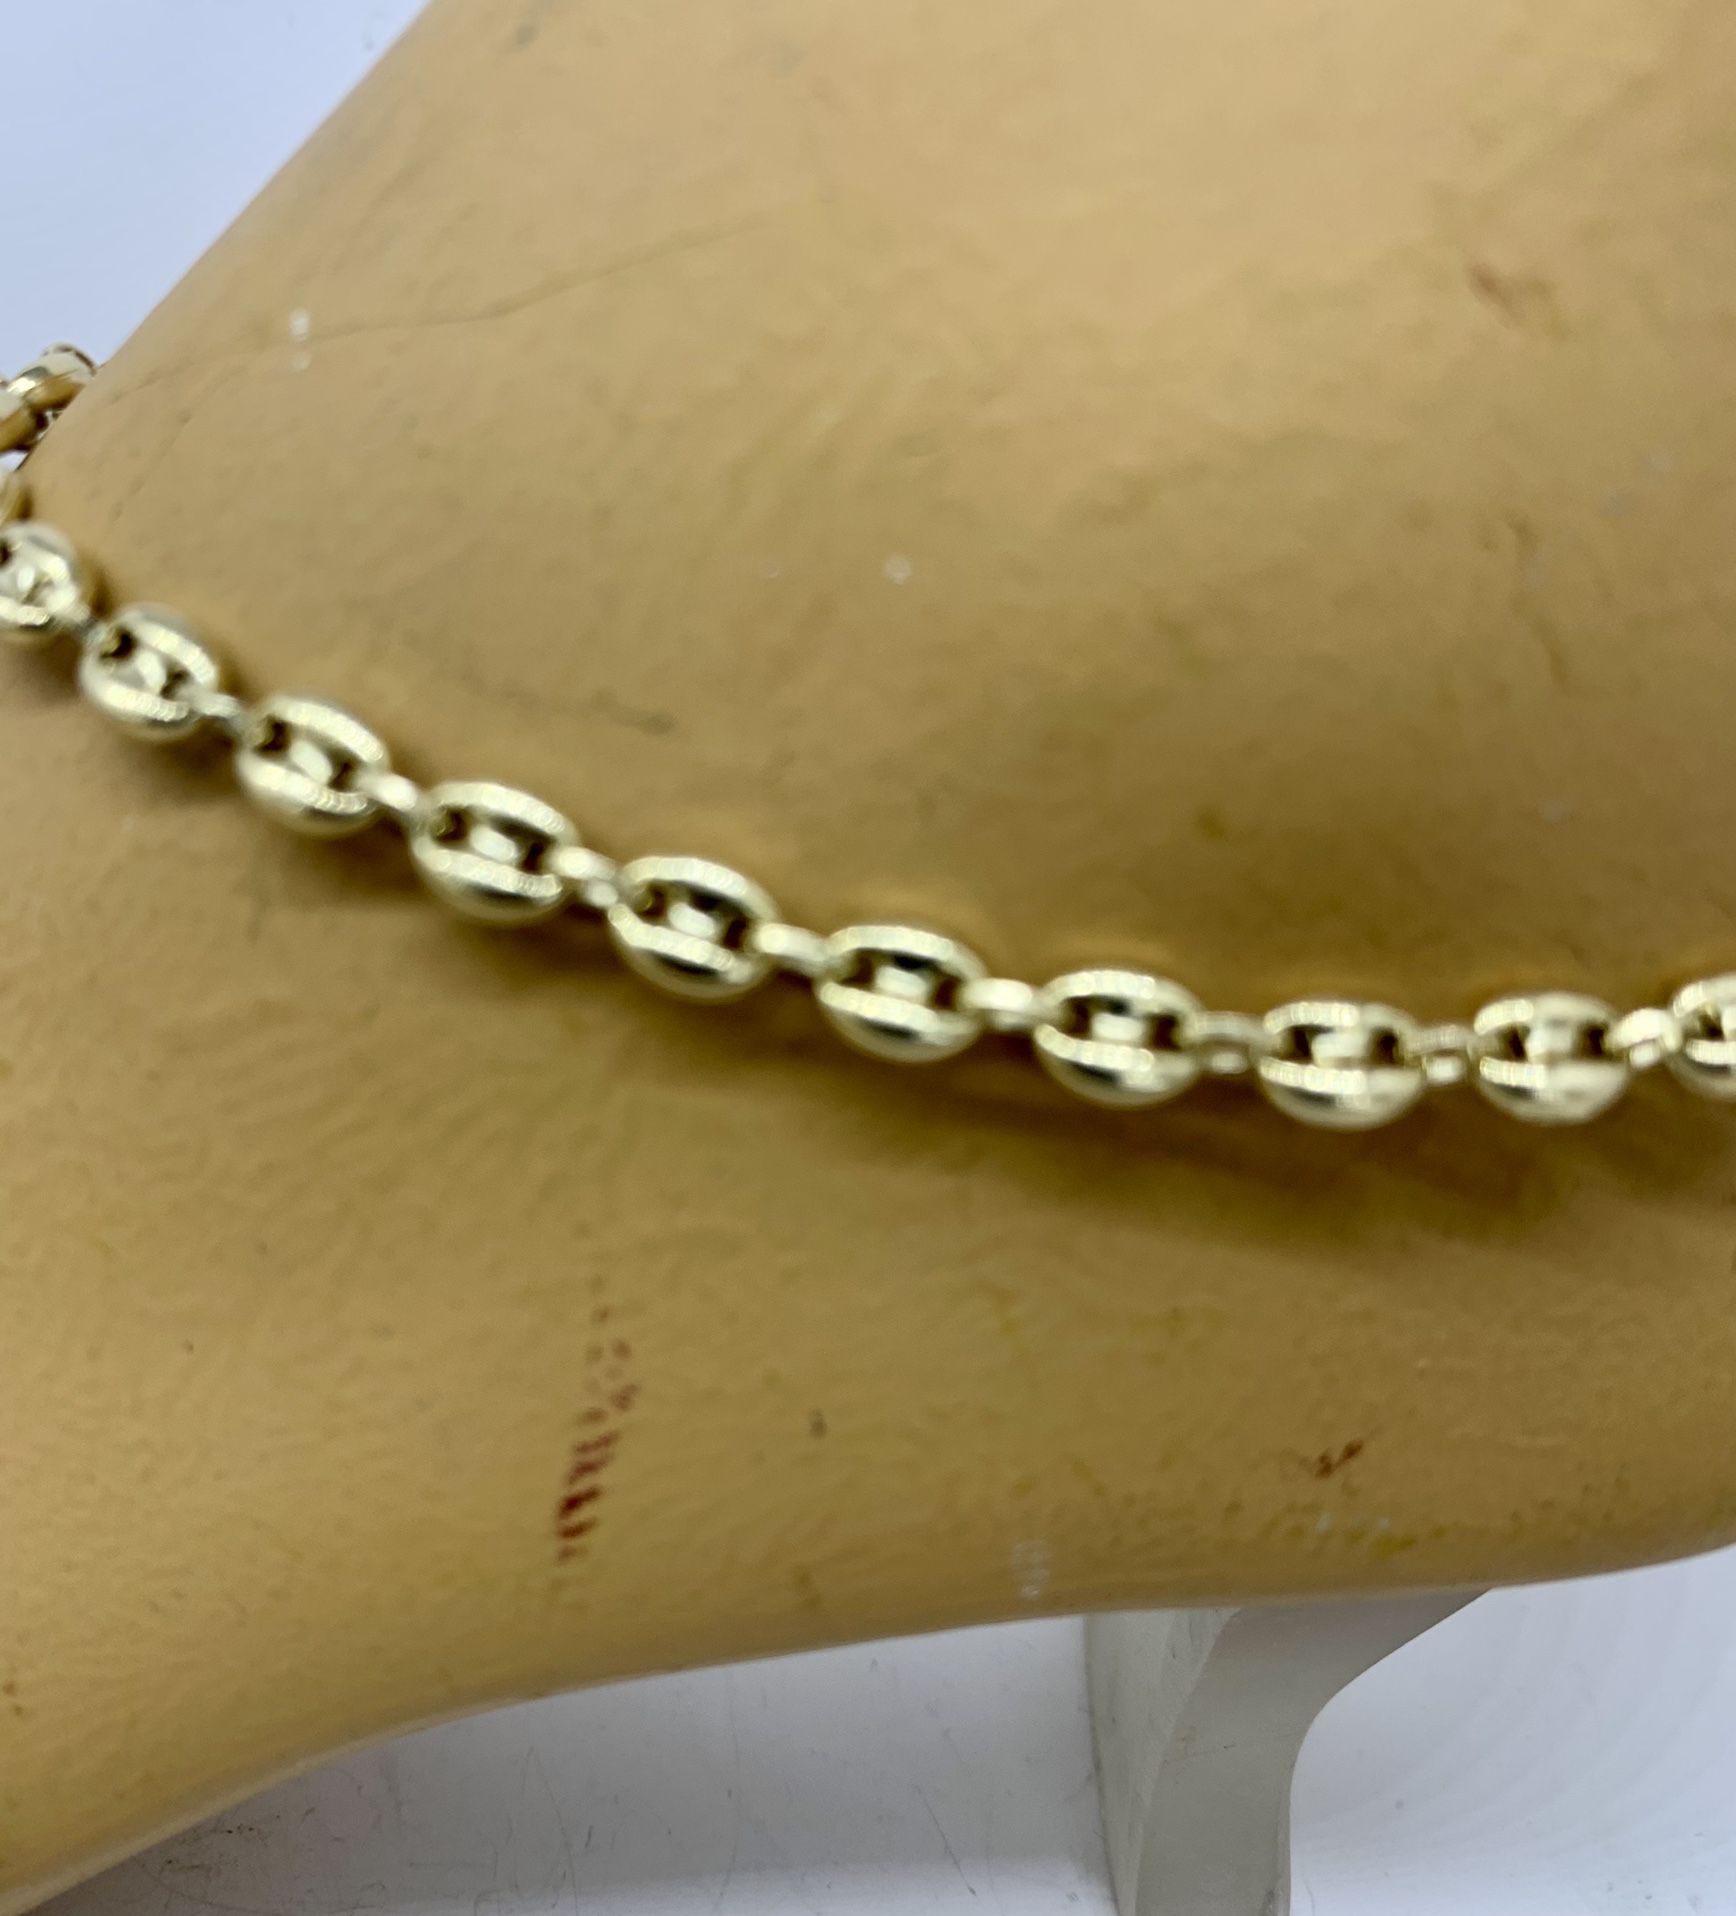 14 karat solid yellow gold Mario near style ankle bracelet anklet